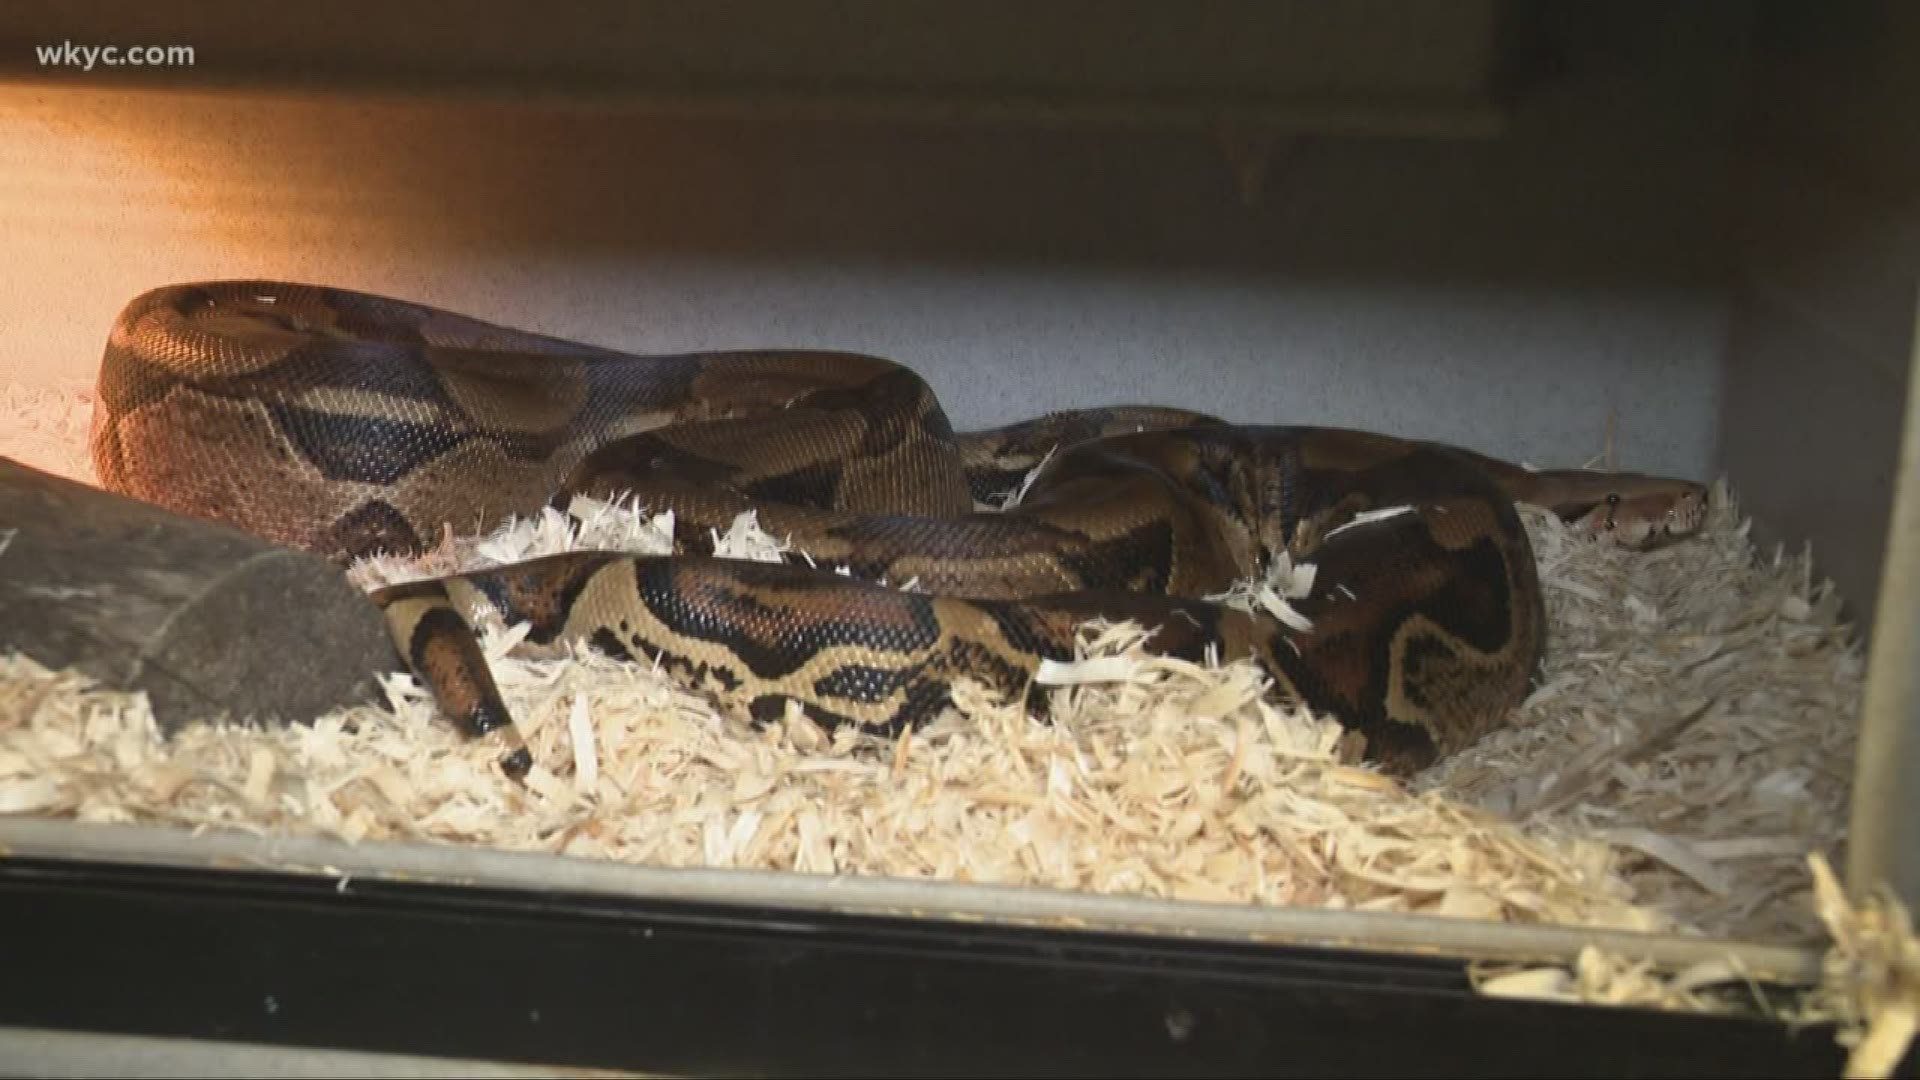 A Brecksville woman received the surprise of her life when she went out on her lawn at her Chapel HIll Road house on Monday afternoon and discovered that a seven-foot boa constrictor was there. 

The woman received assistance from the Brecksville Police and Brecksville Fire Department, along with the city's animal warden, who were able to keep the snake restrained until experts from Herps Alive Reptile Rescue in South Euclid arrived to take the boa.nds boa constrictor on lawn